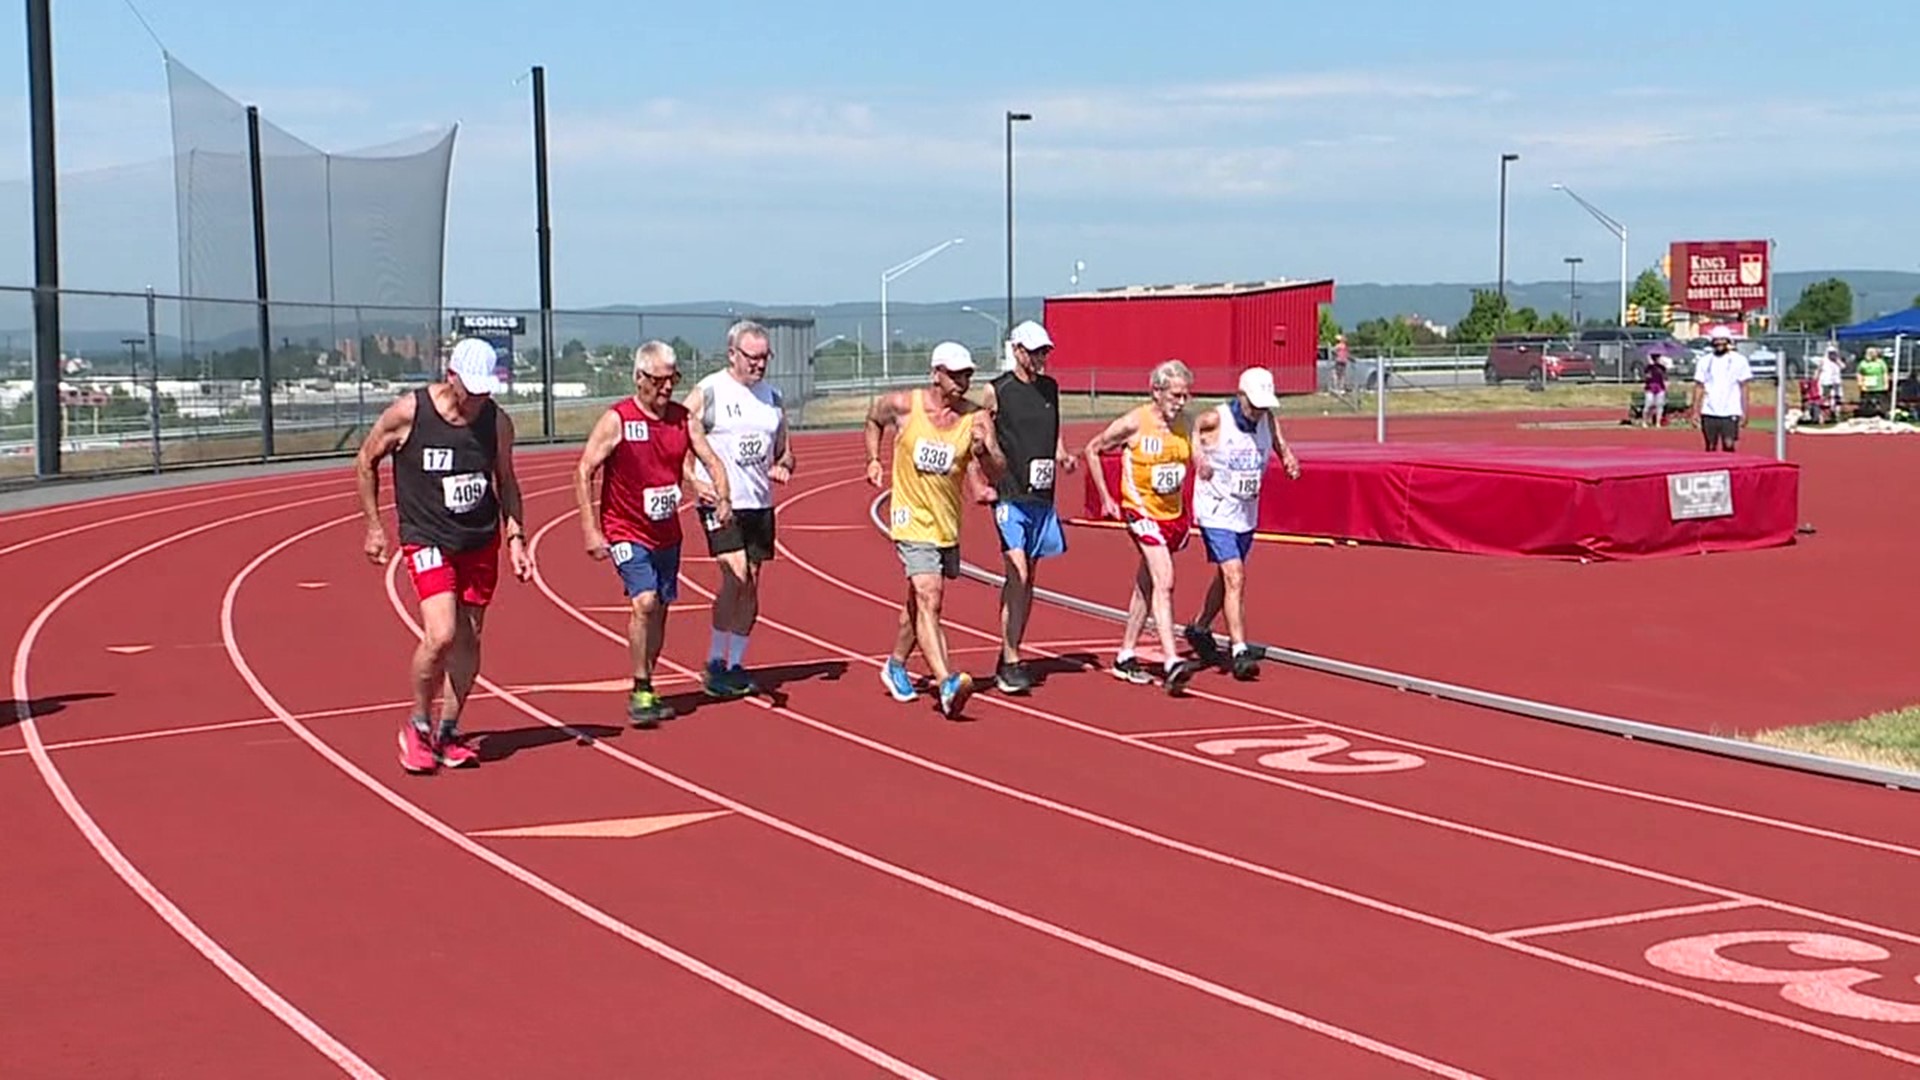 The Senior Games competition is heating up for a group of athletes from our area and beyond.